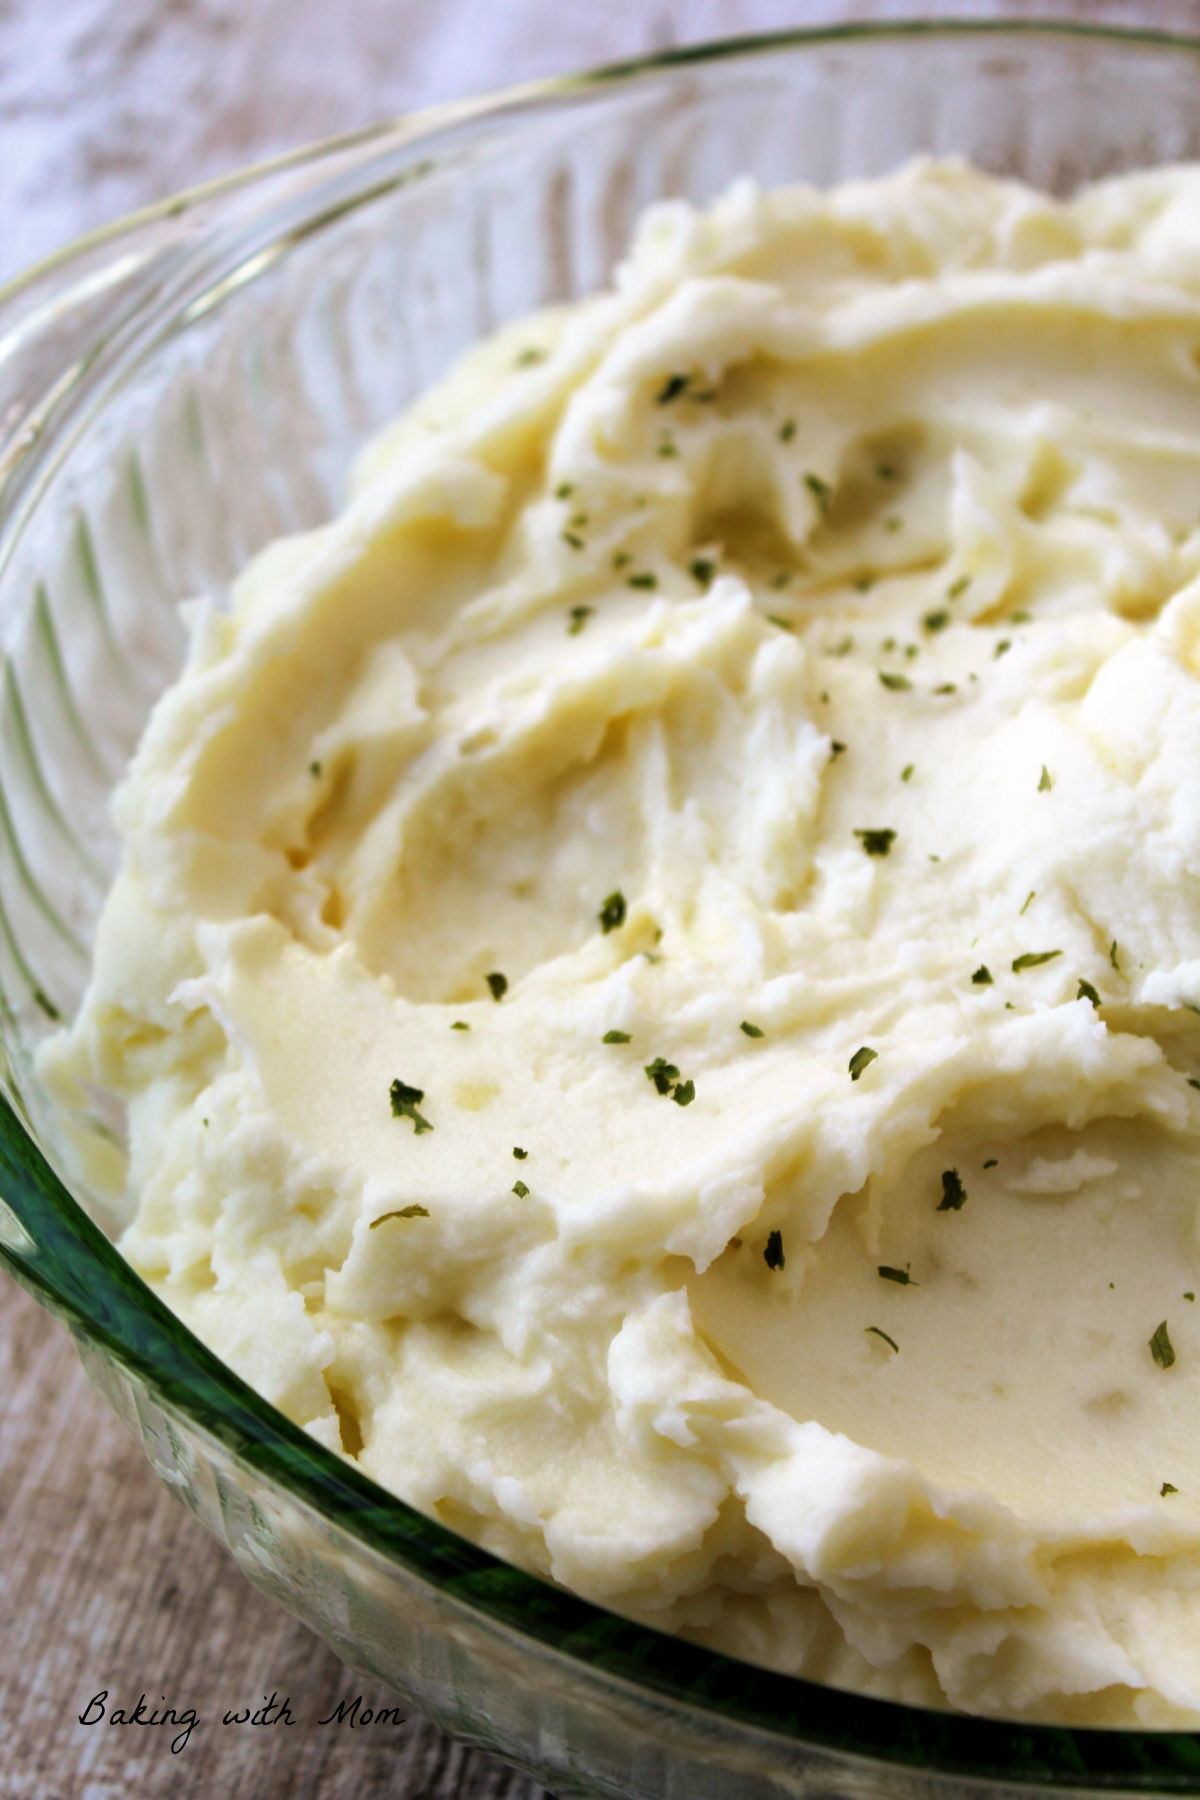 Bowl of mashed potatoes with parsley flakes on top